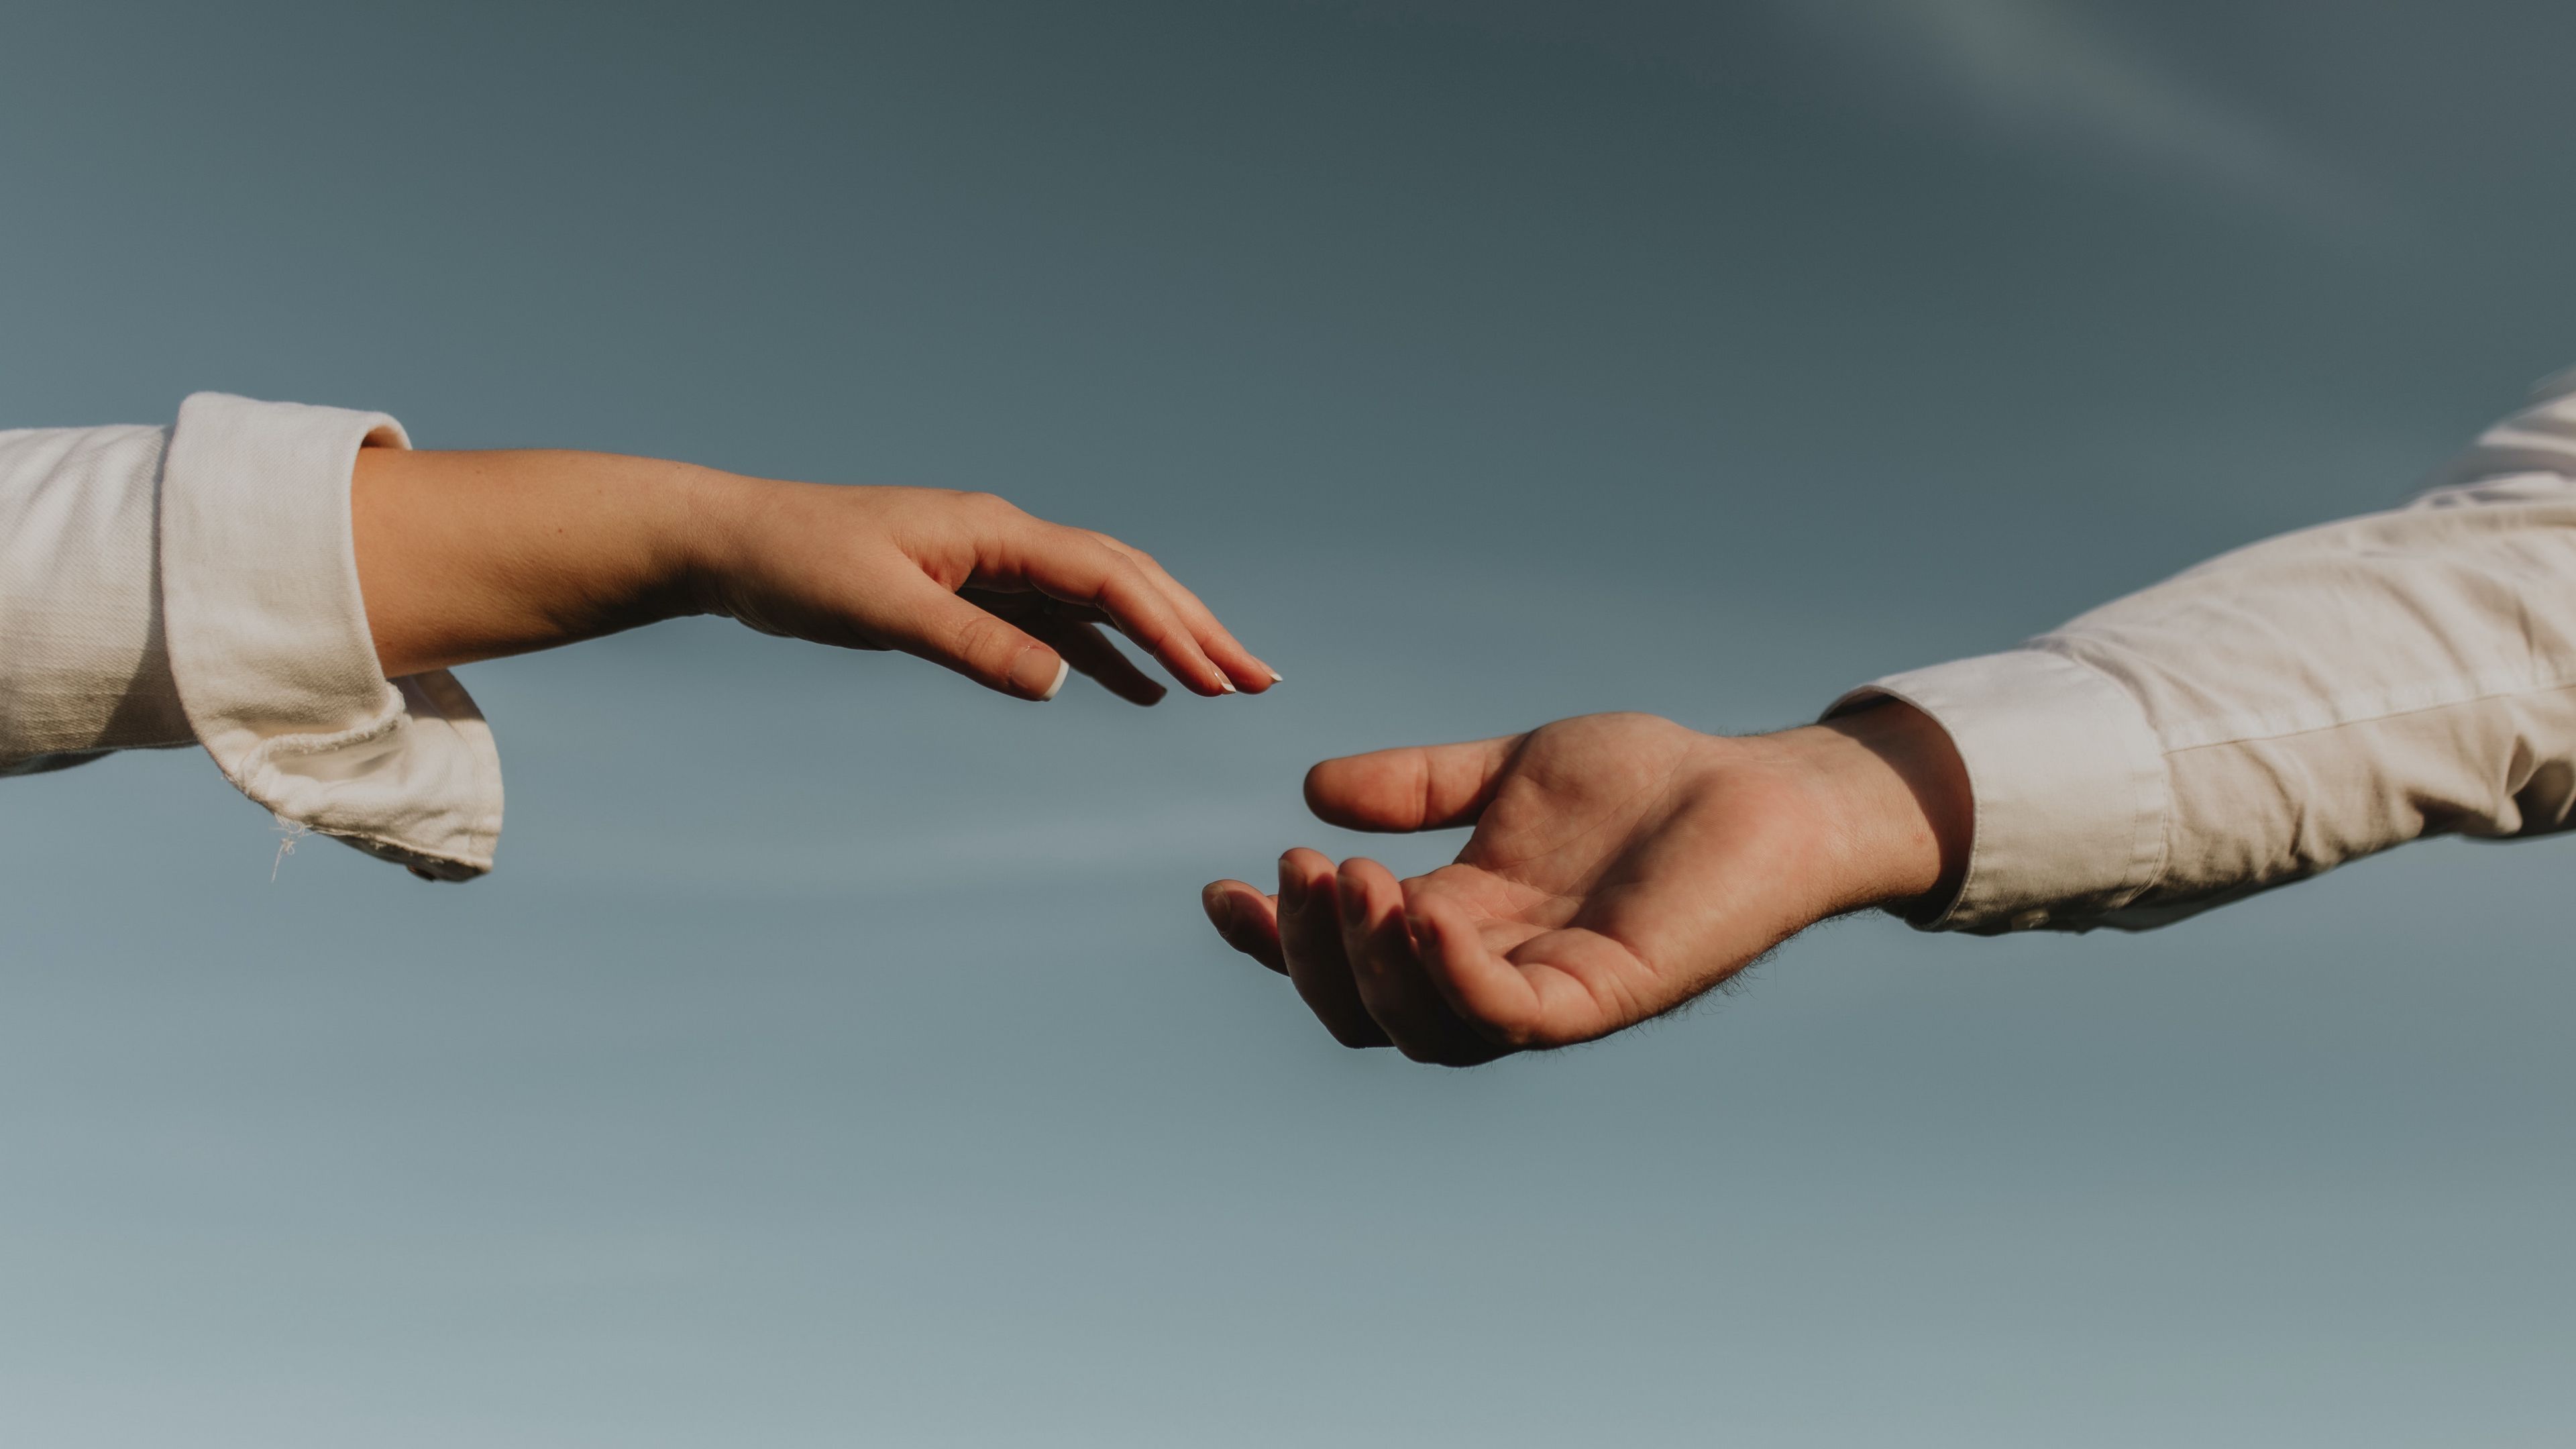 Download wallpaper 3840x2160 hands, touch, couple 4k uhd 16:9 hd background